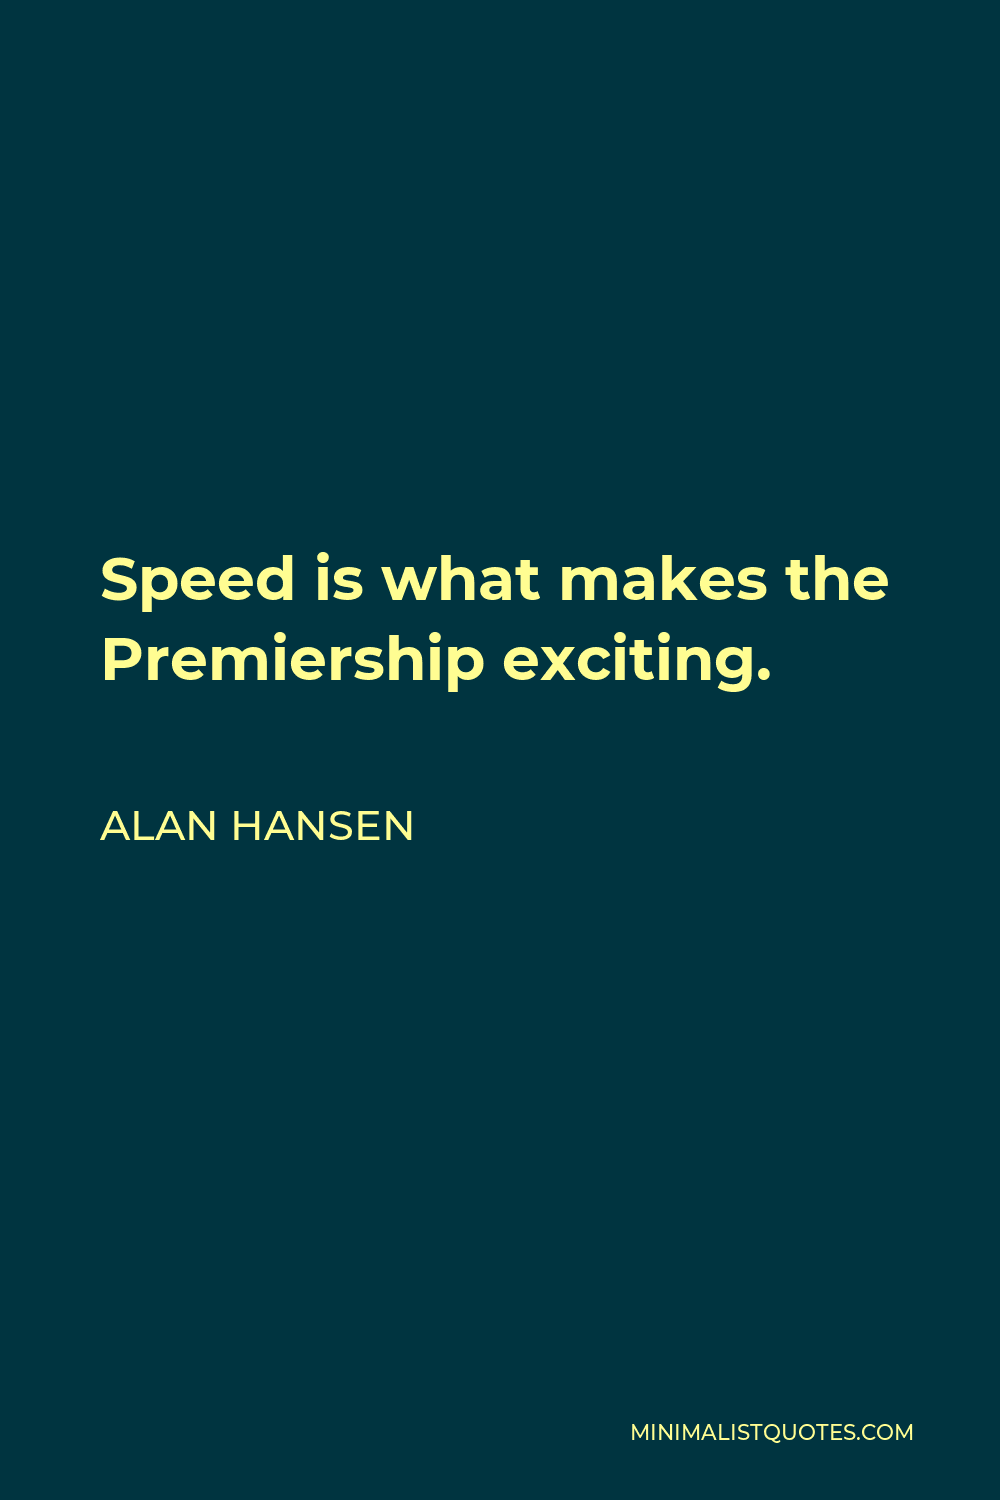 Alan Hansen Quote - Speed is what makes the Premiership exciting.